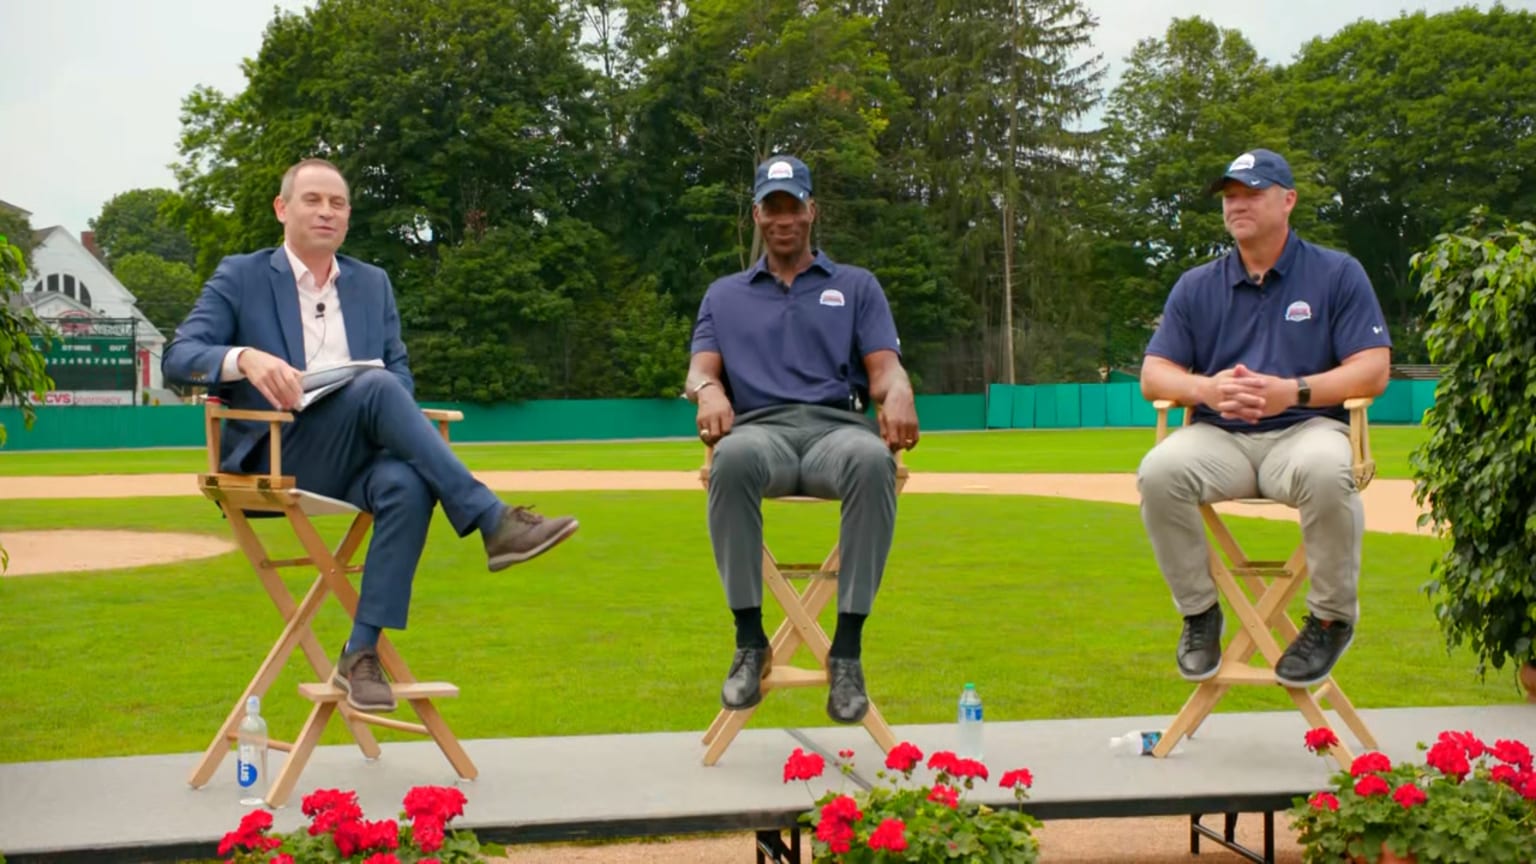 Jon Paul Morosi, Fred McGriff and Scott Rolen sit in chairs at Doubleday Field